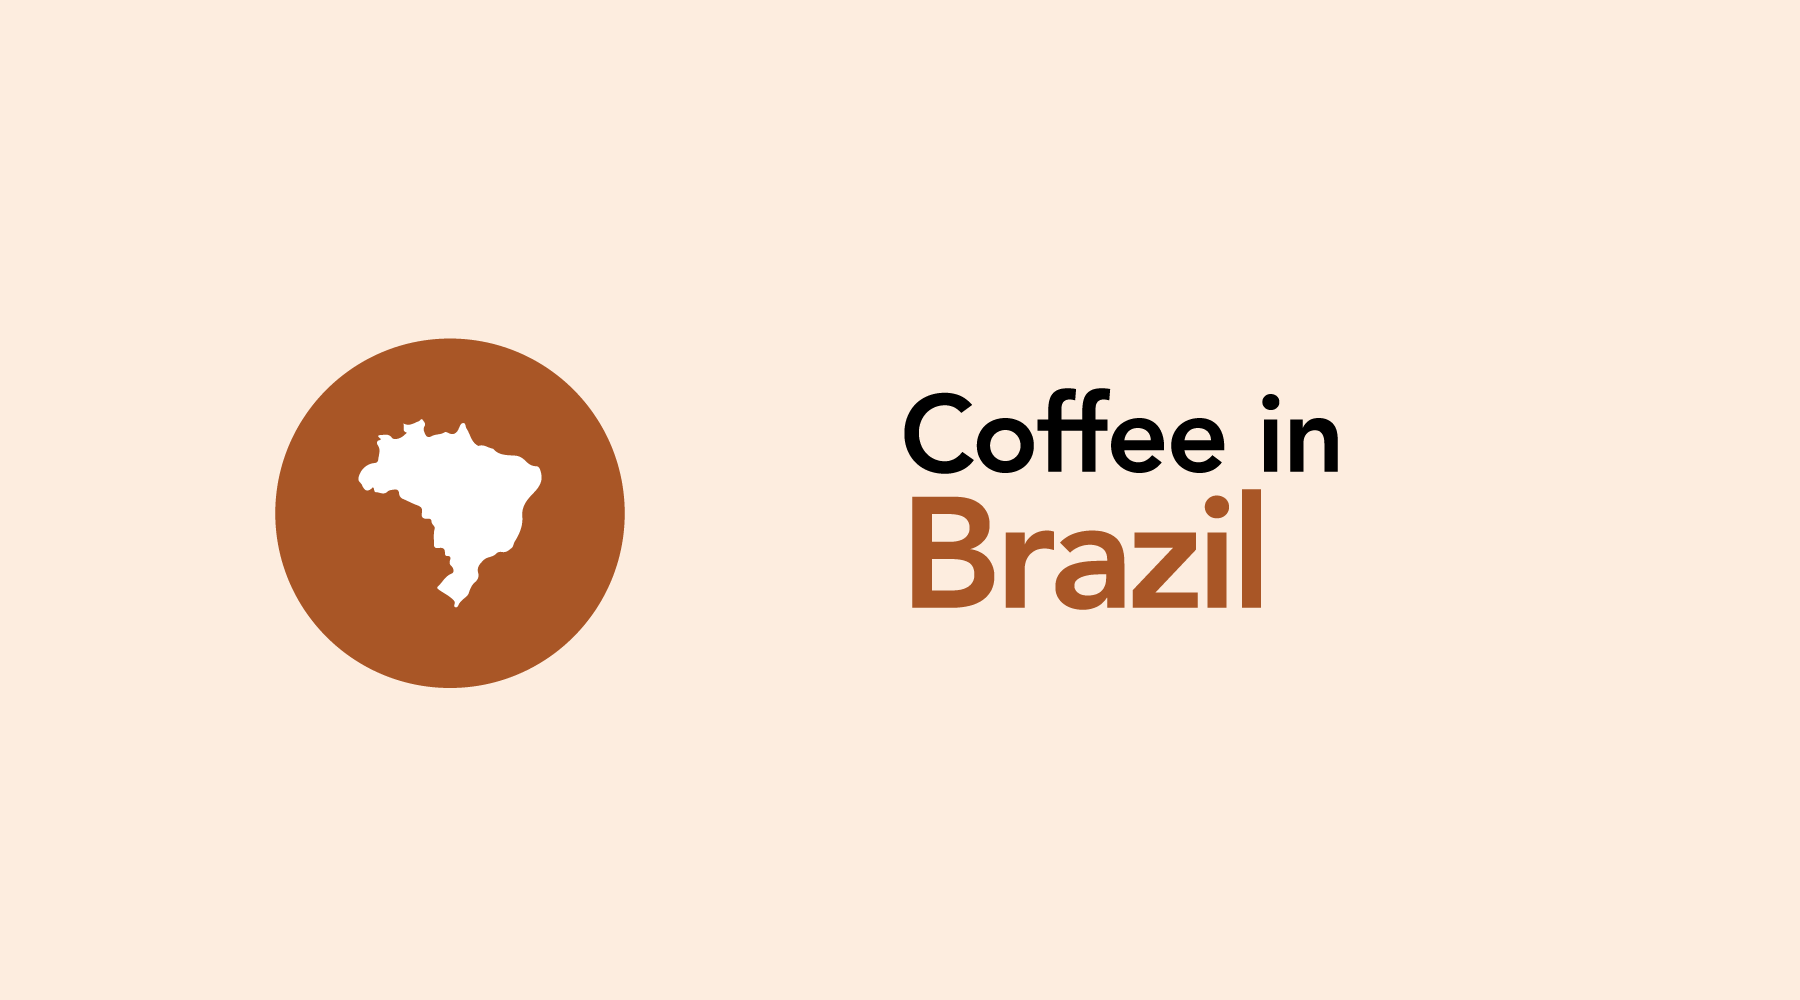 Brazil | The World's Leading Coffee Producer